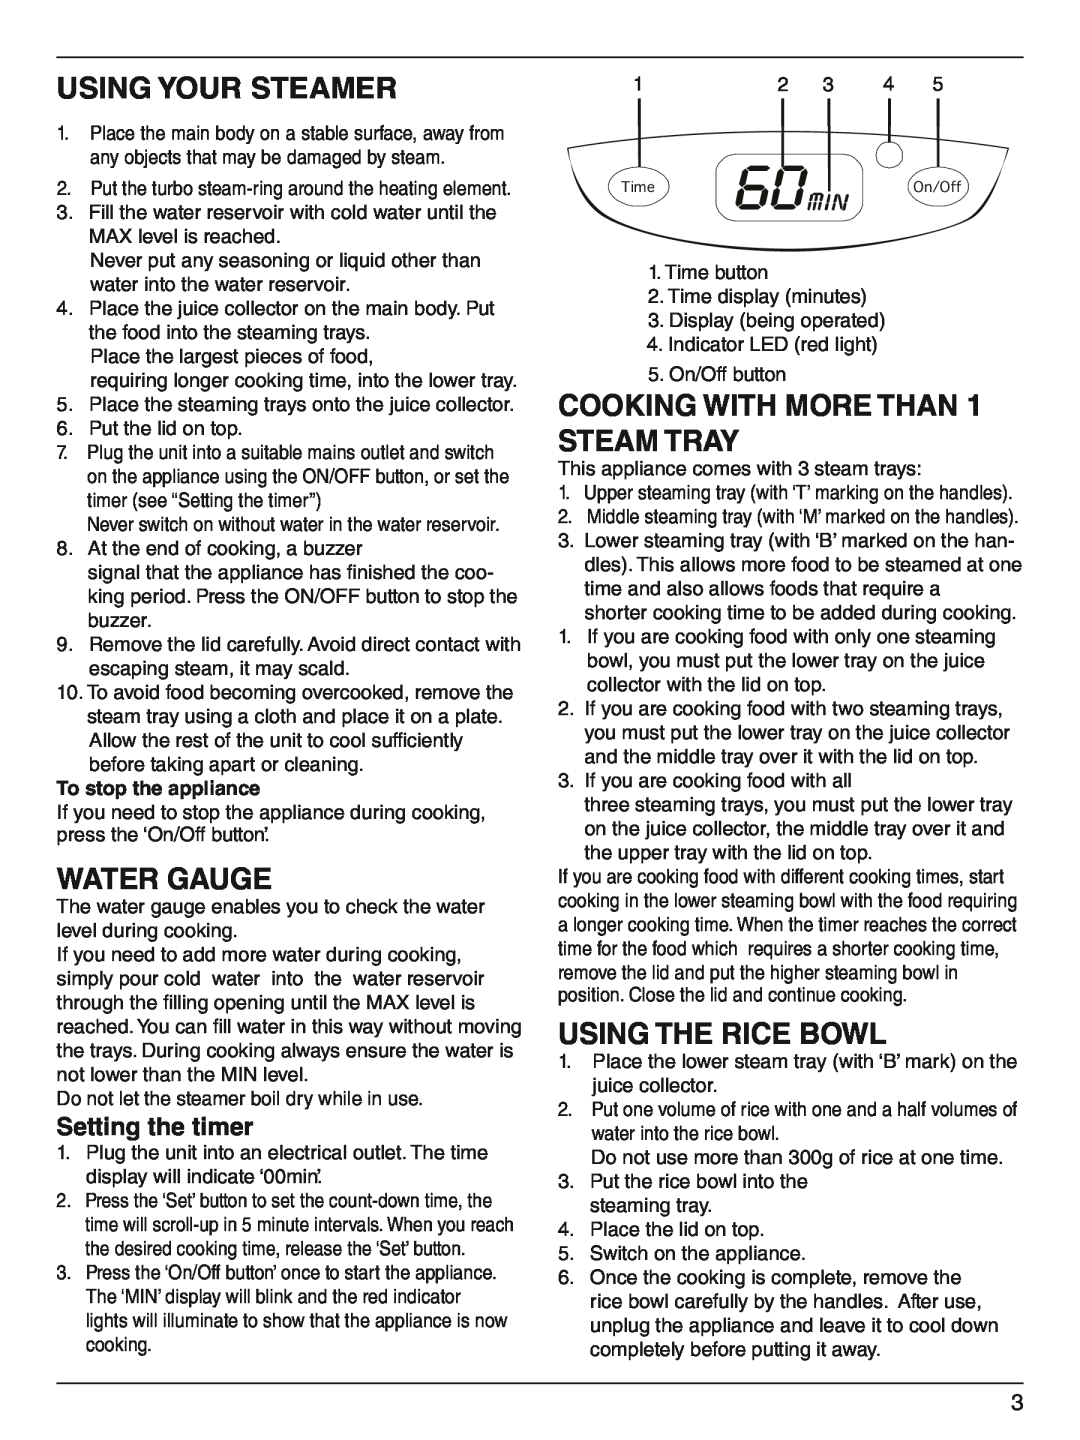 Cuisinart FP-2207A manual Using your steamer, Water gauge, Cooking with more than 1 steam tray, Using the rice bowl 